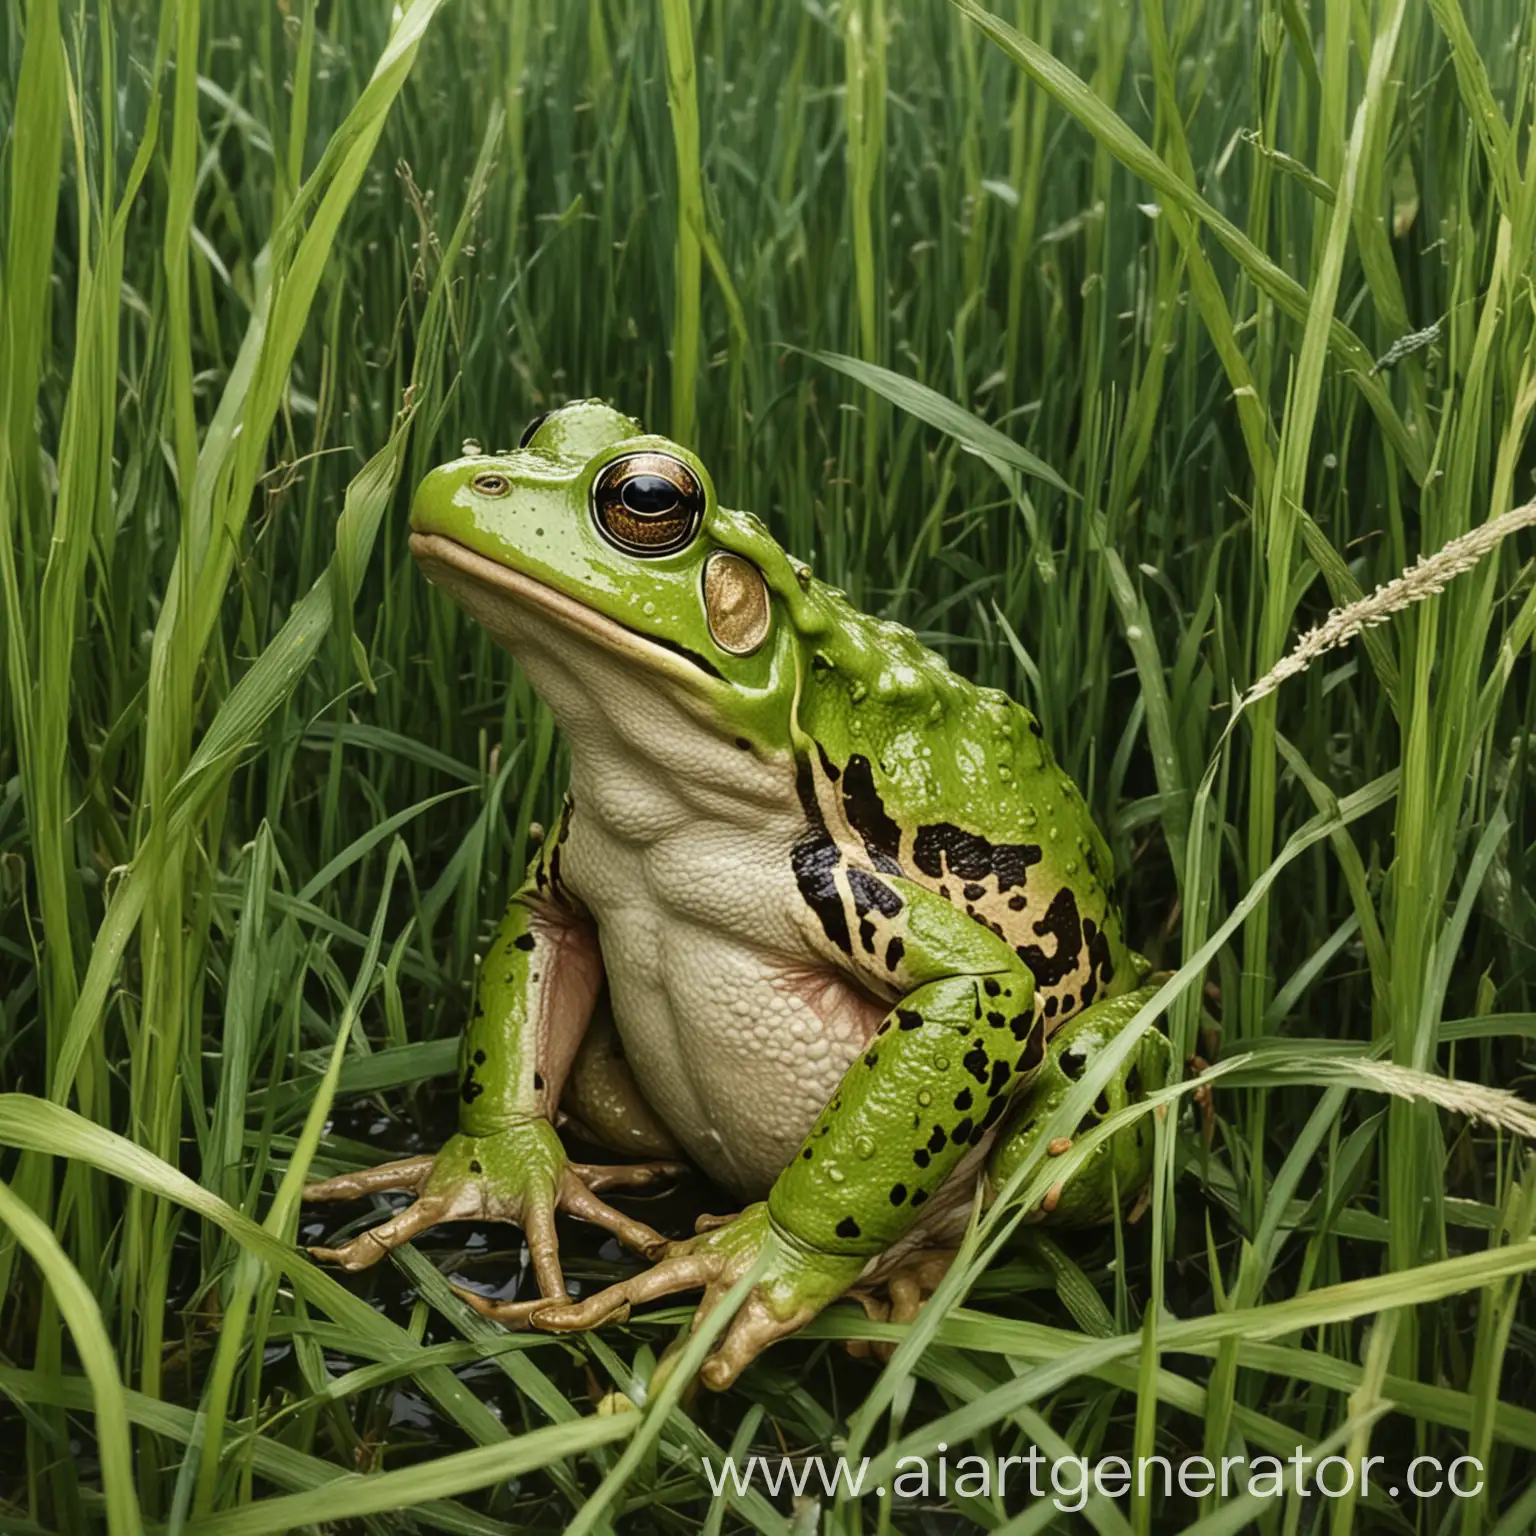 Camouflaged-Frog-in-Lush-Green-Grass